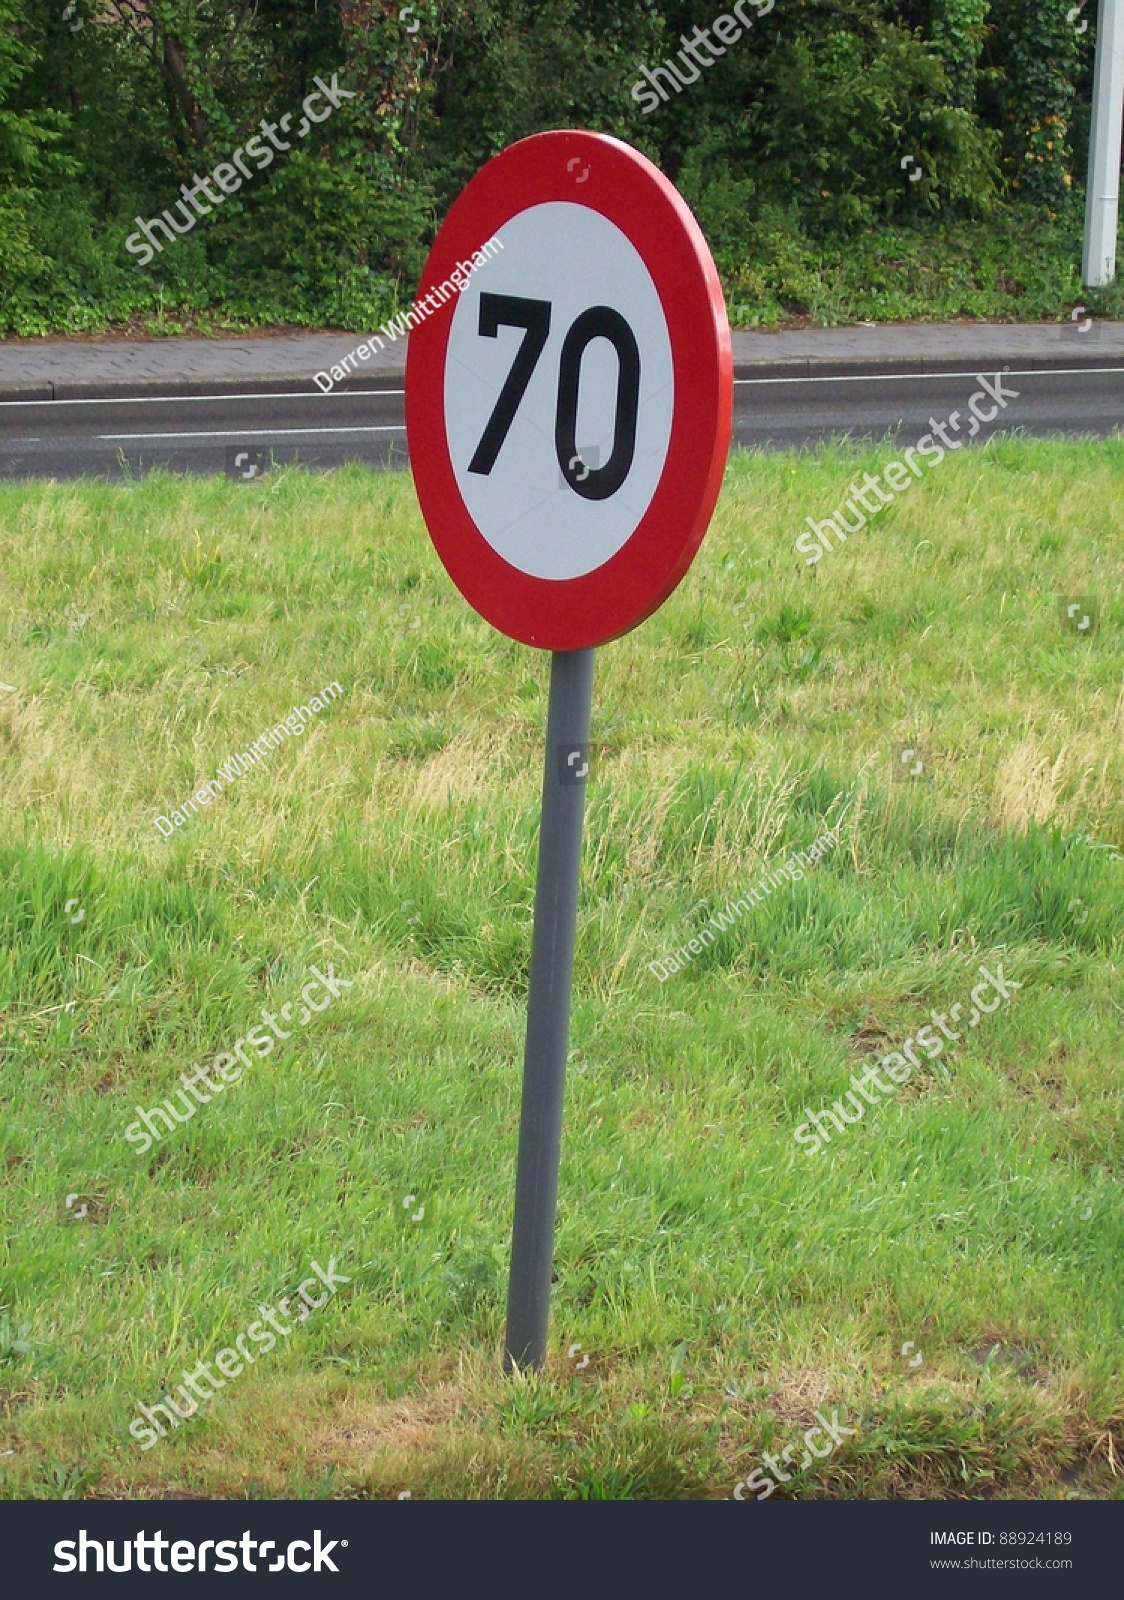 Photo Of An Isolated Road Sign Displaying Maximum Speed Limit ...